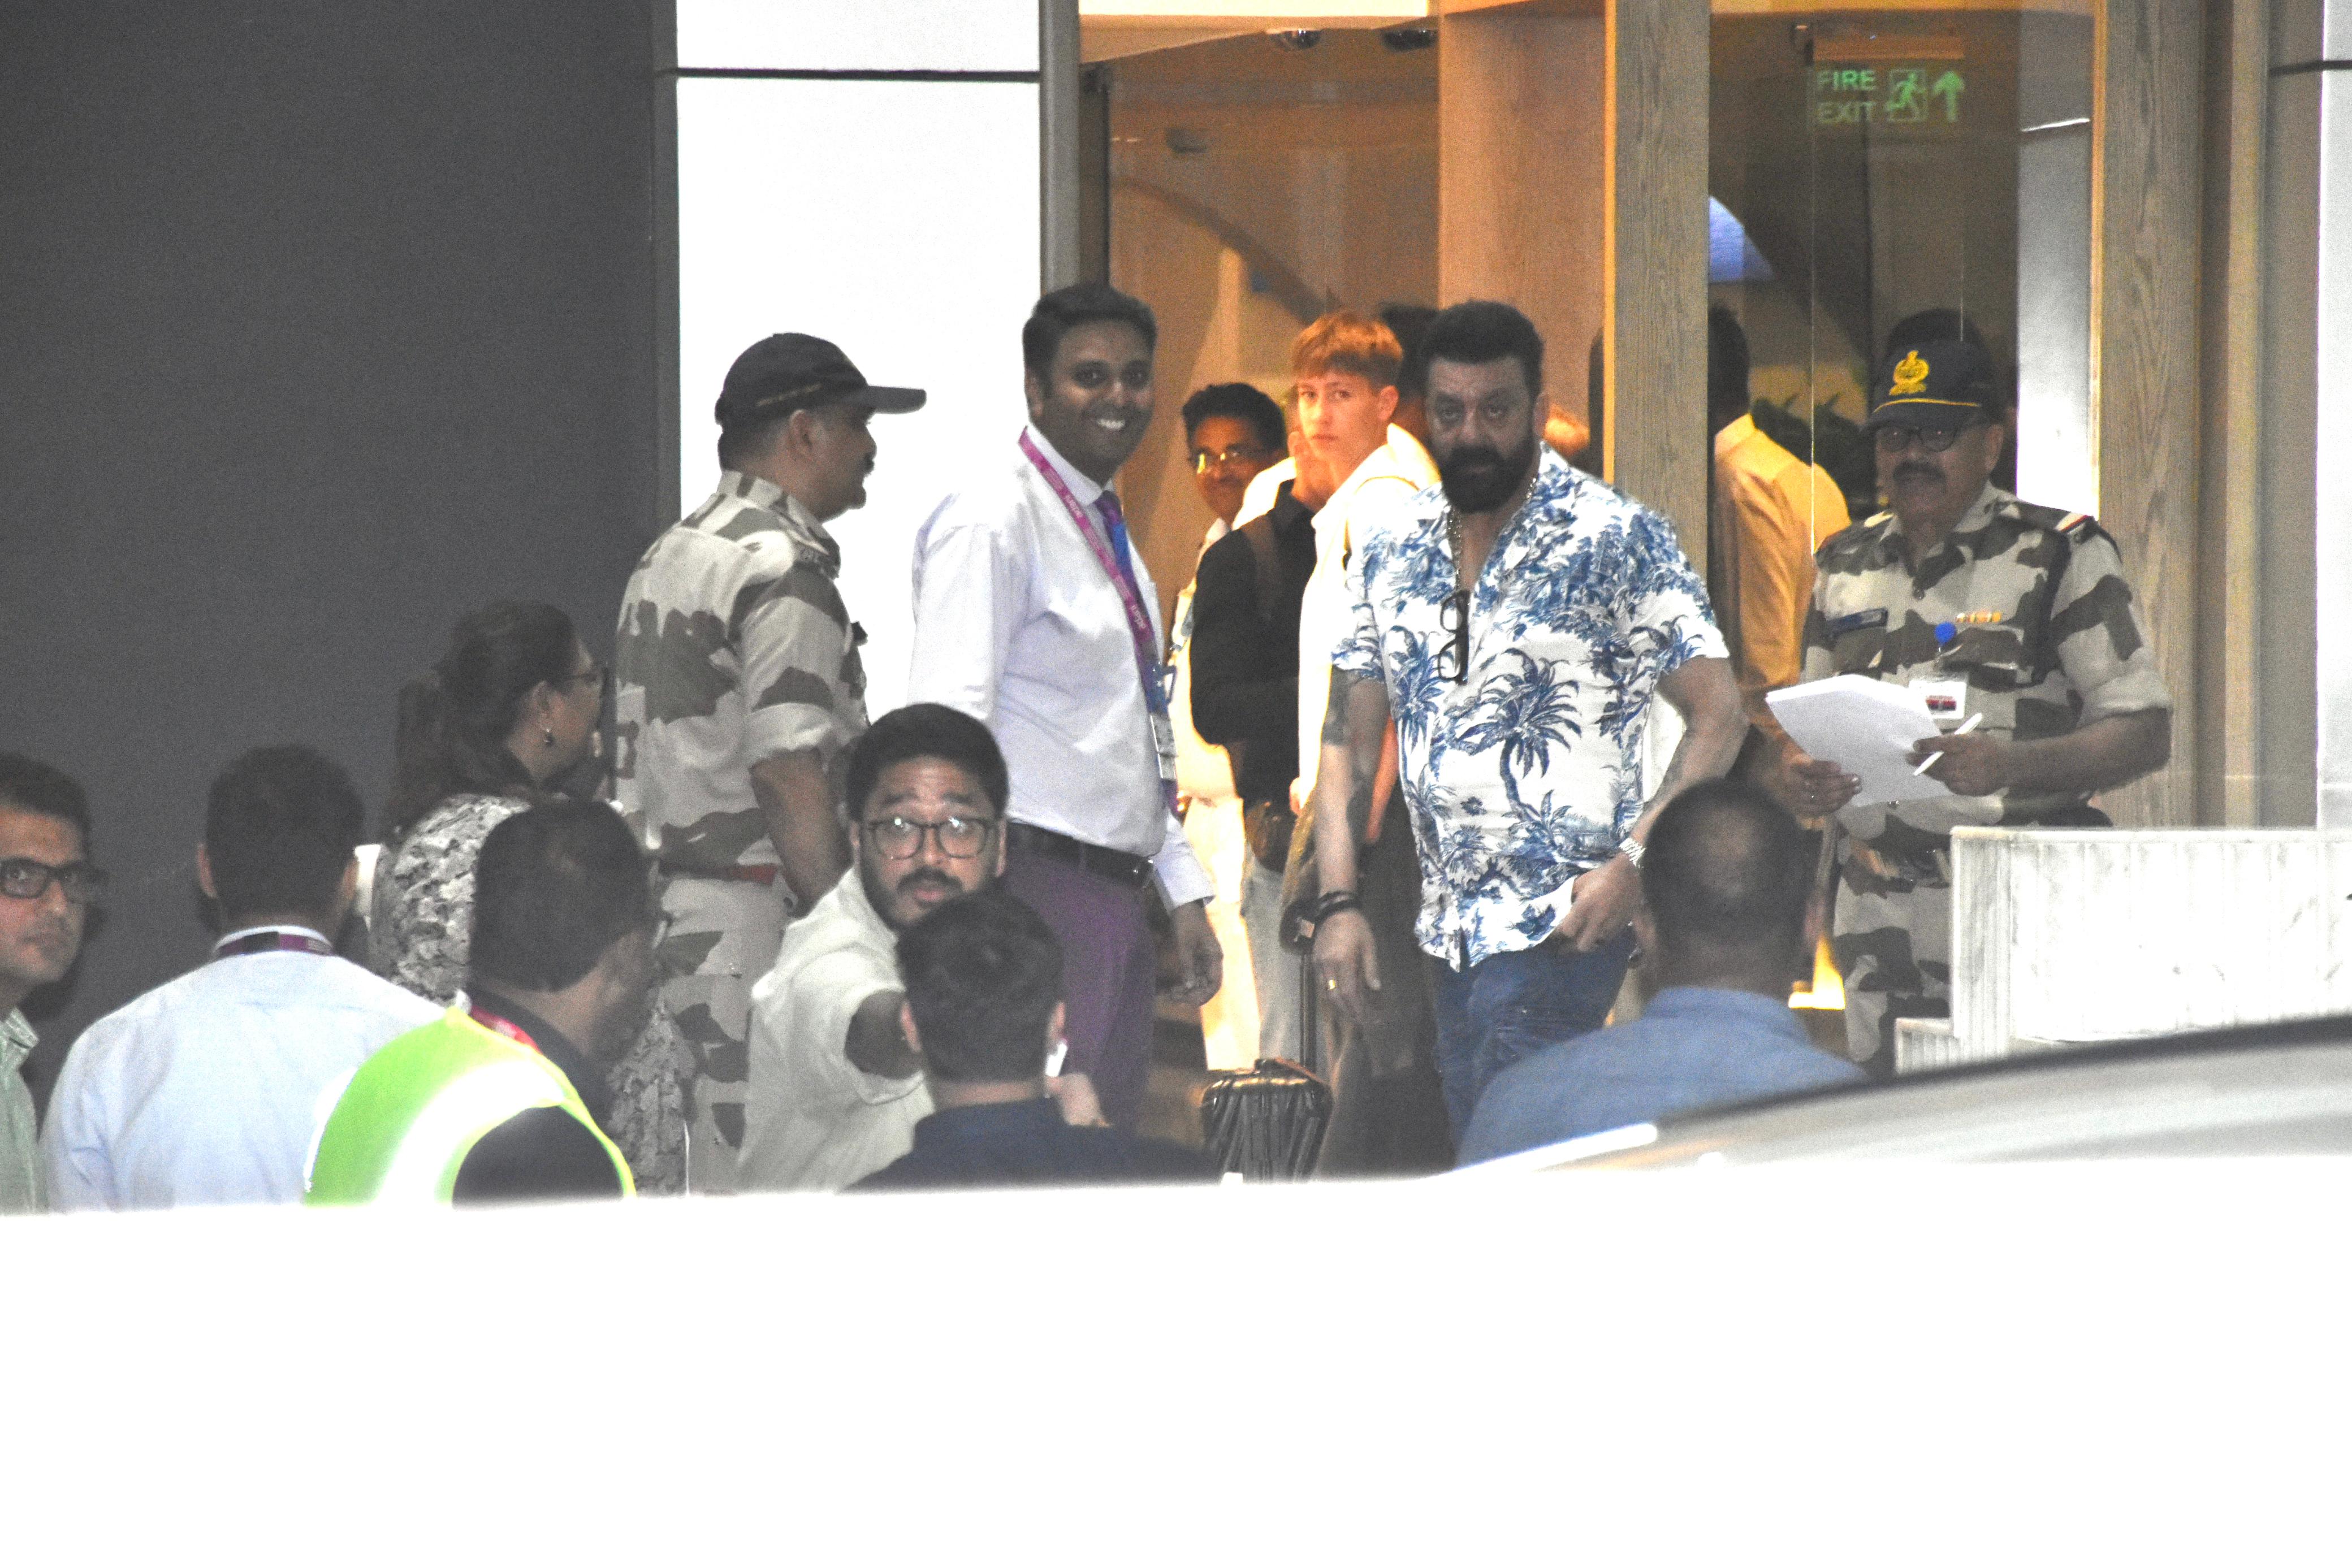 Sanjay Dutt was spotted at the private Kalina airport this evening